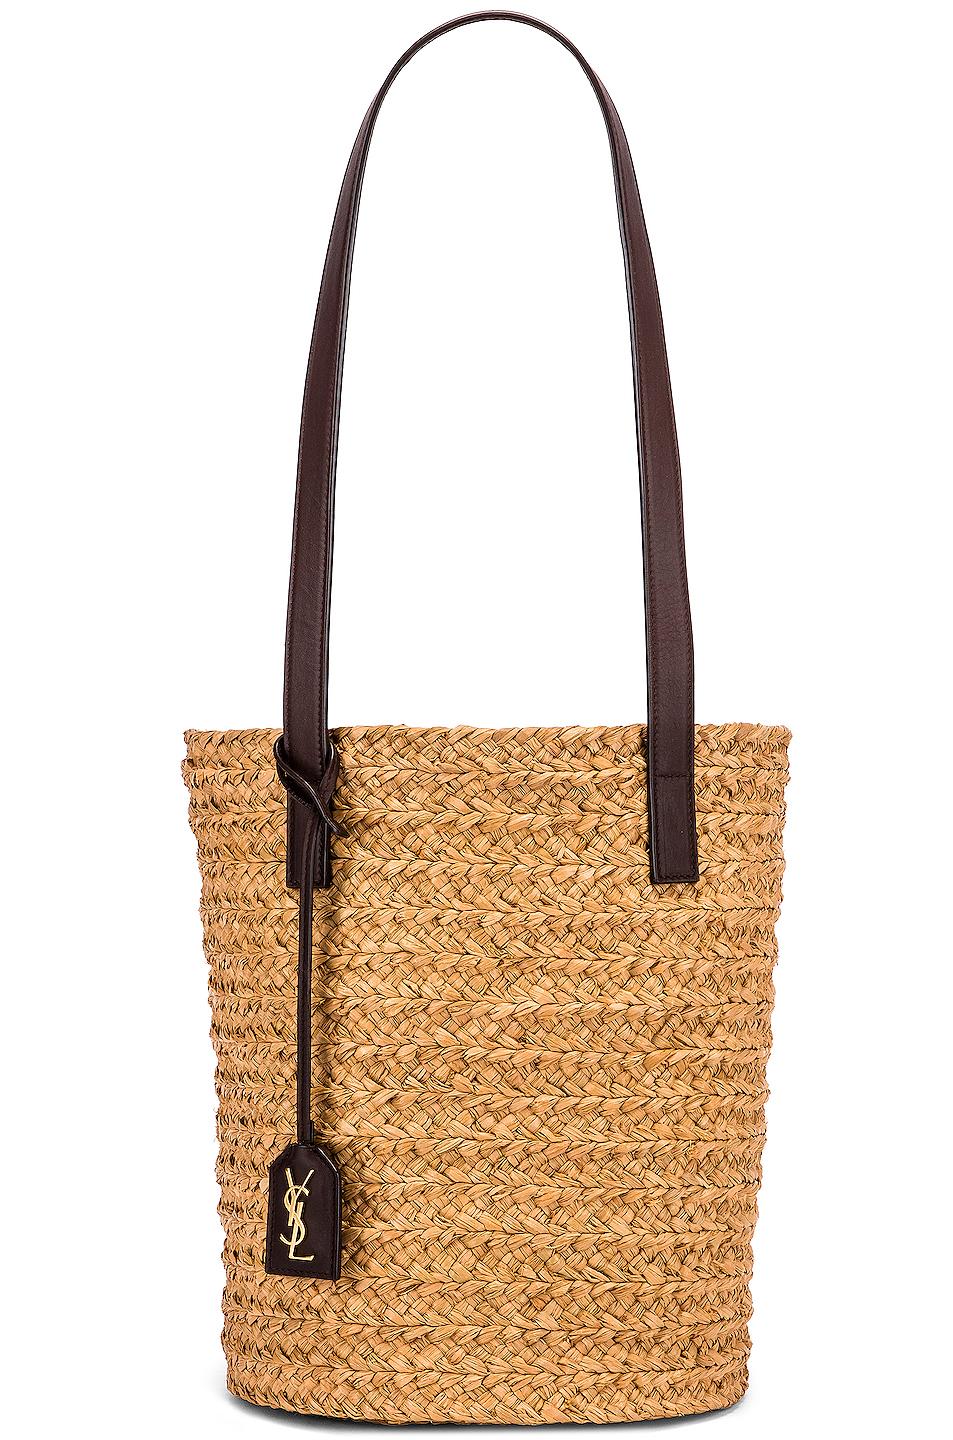 Saint Laurent Leather Ysl Woven Raffia Tote Bag in Natural (Brown ...